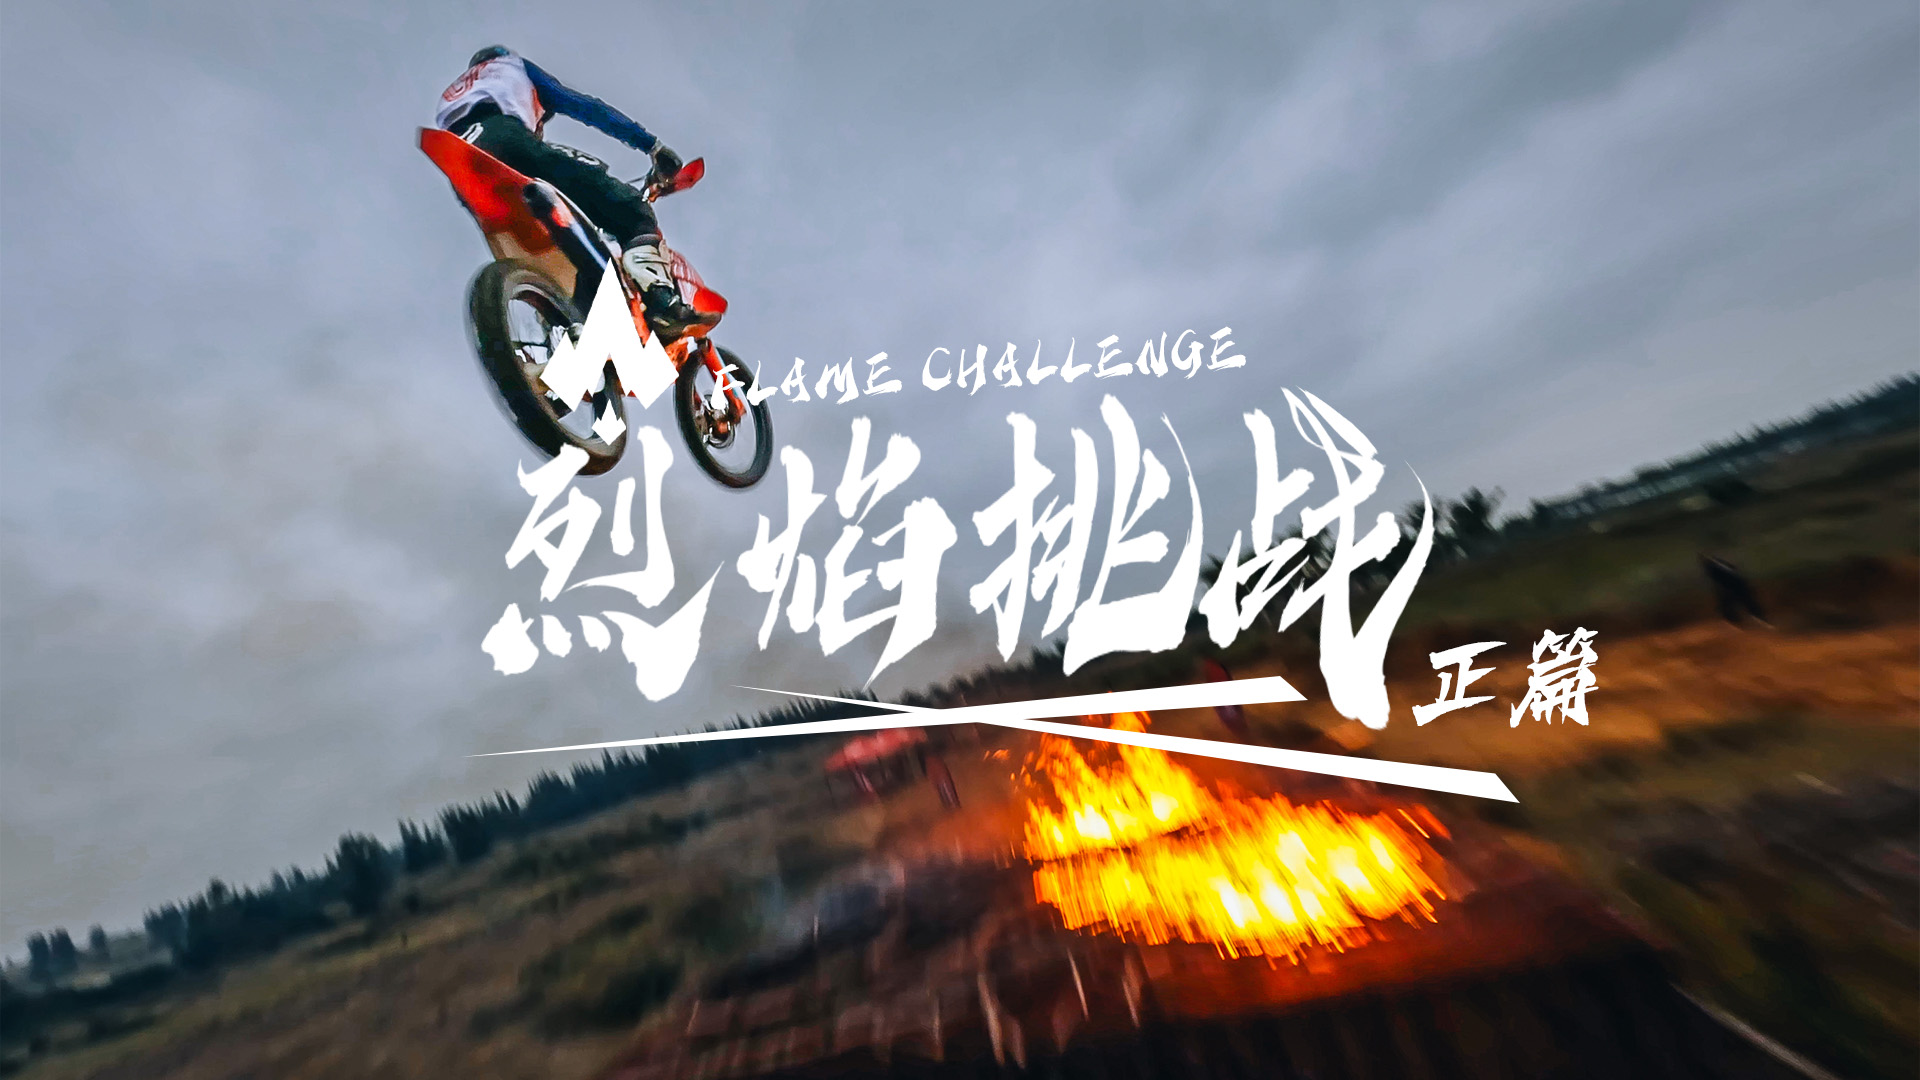 A challenge of leap over 30-meter flame on a dirt bike